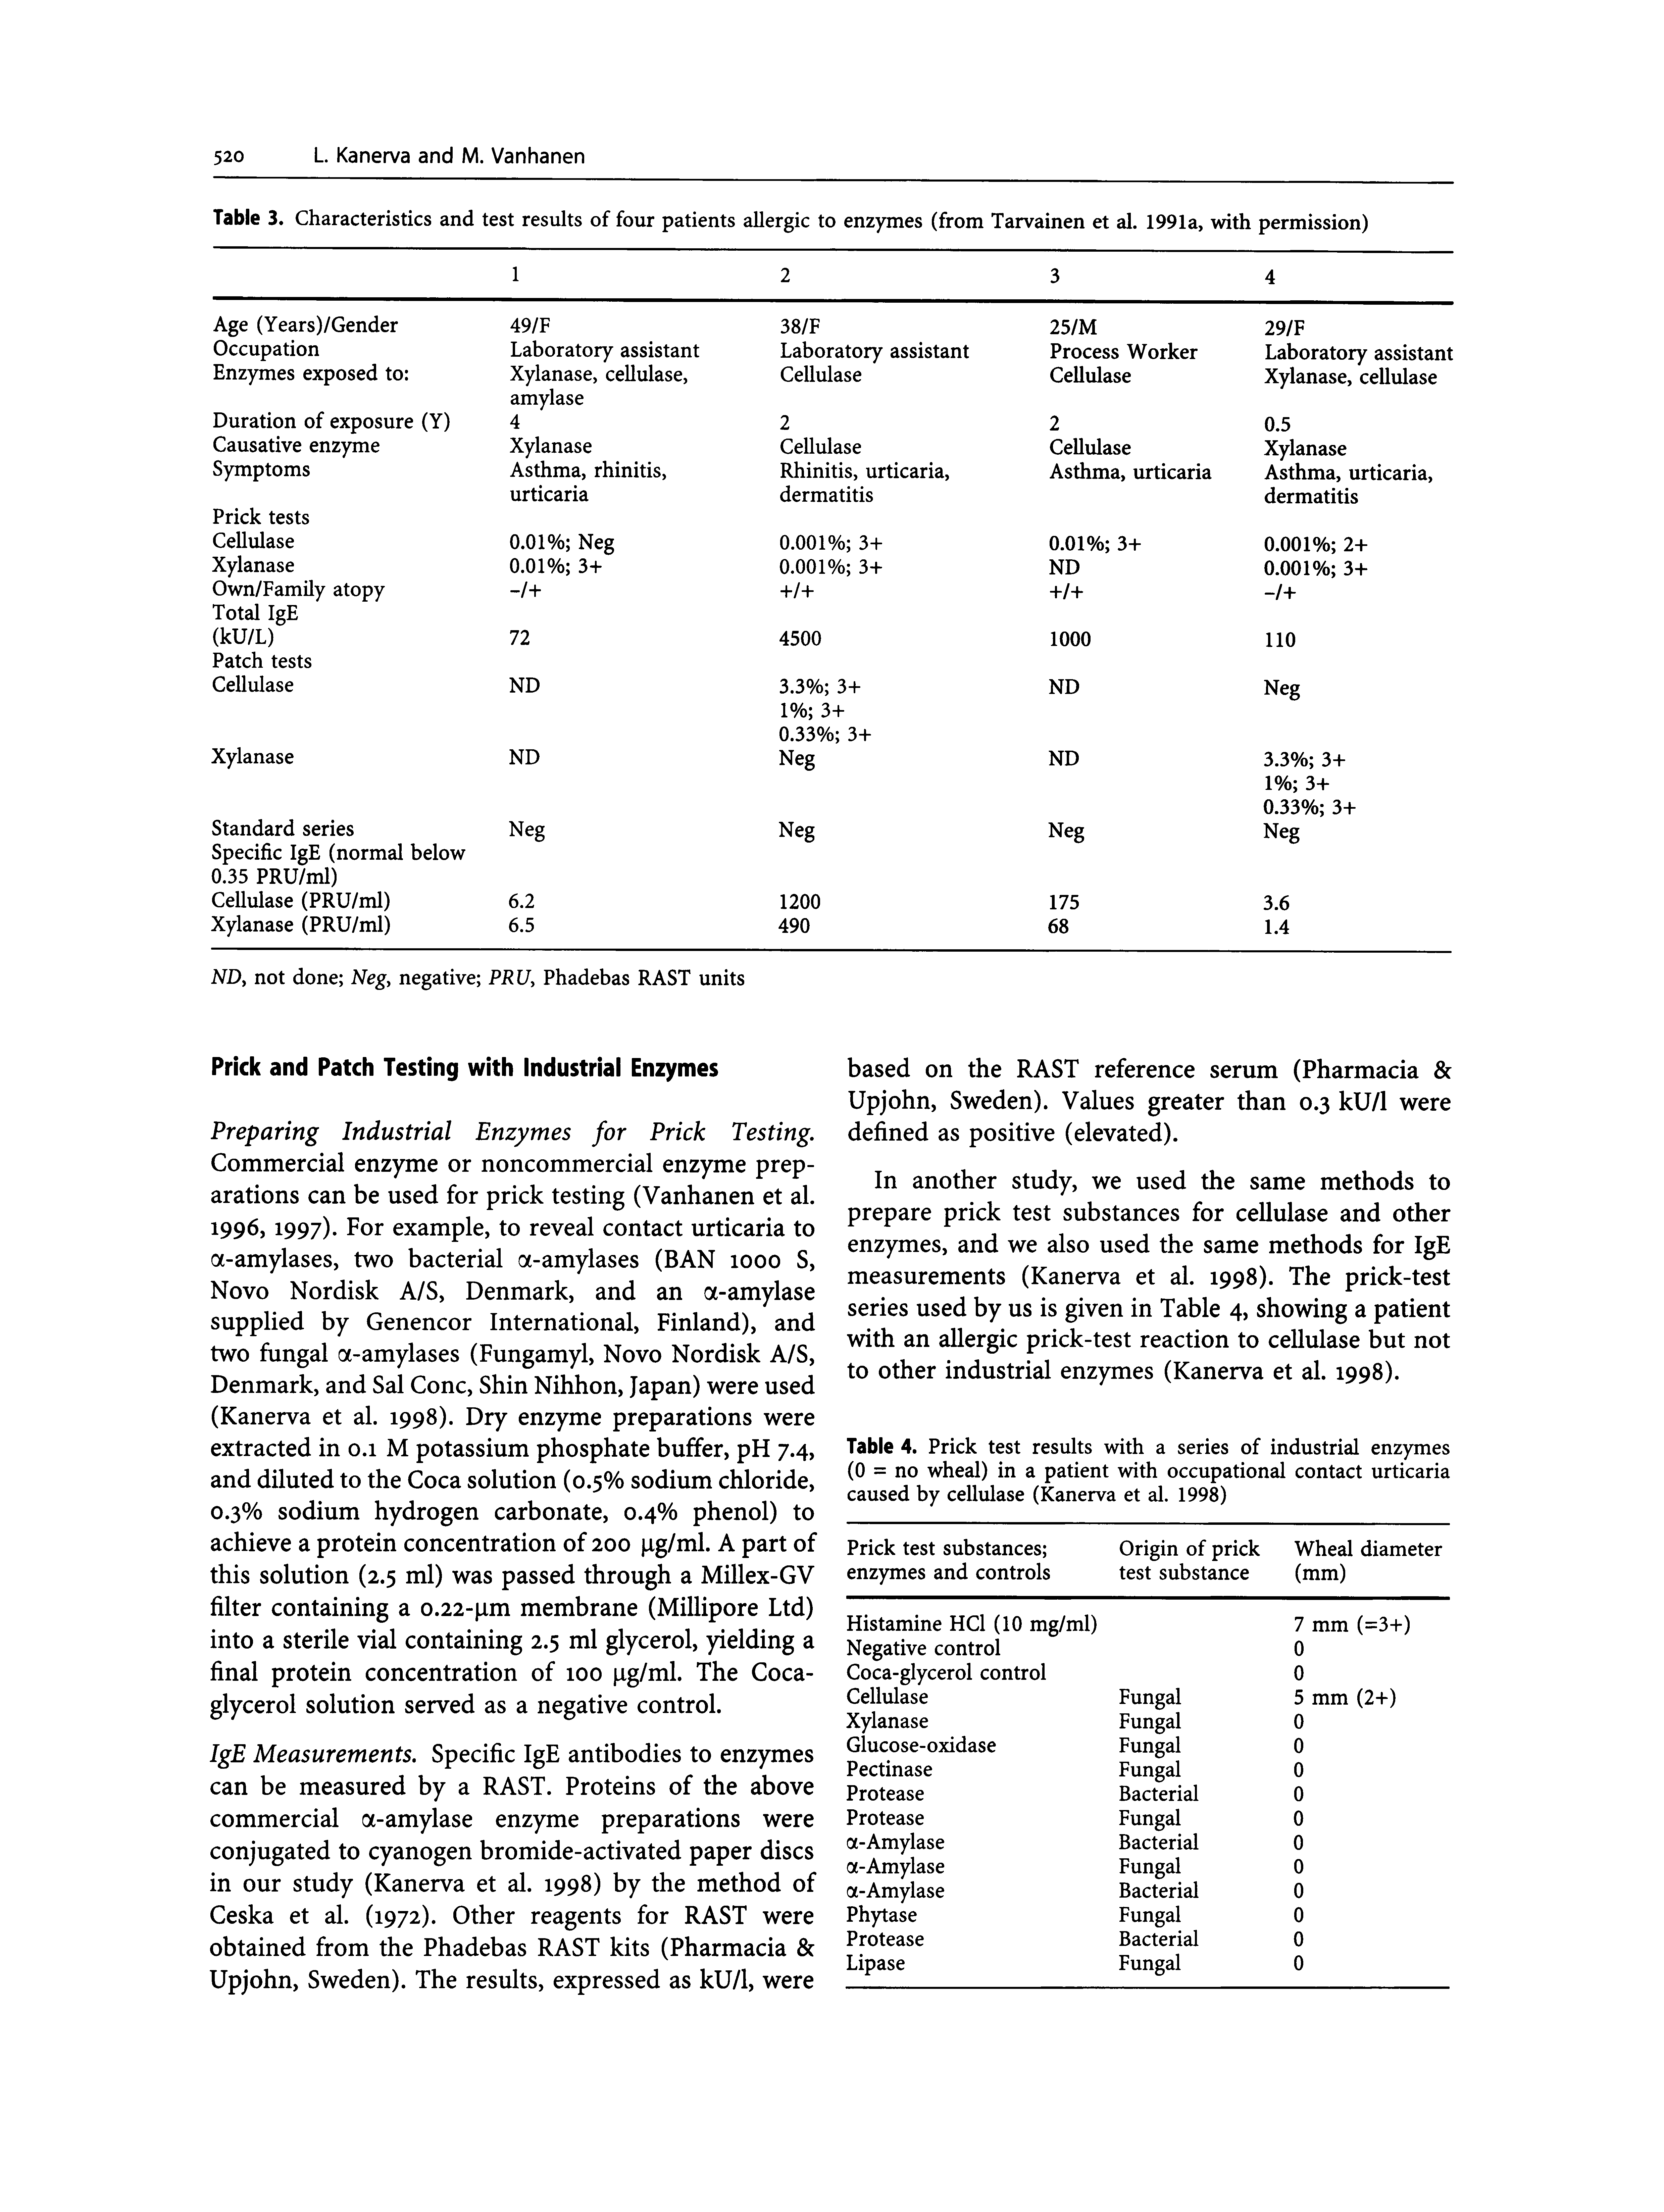 Table 4. Prick test results with a series of industrial enzymes (0 = no wheal) in a patient with occupational contact urticaria caused by cellulase (Kanerva et al. 1998)...